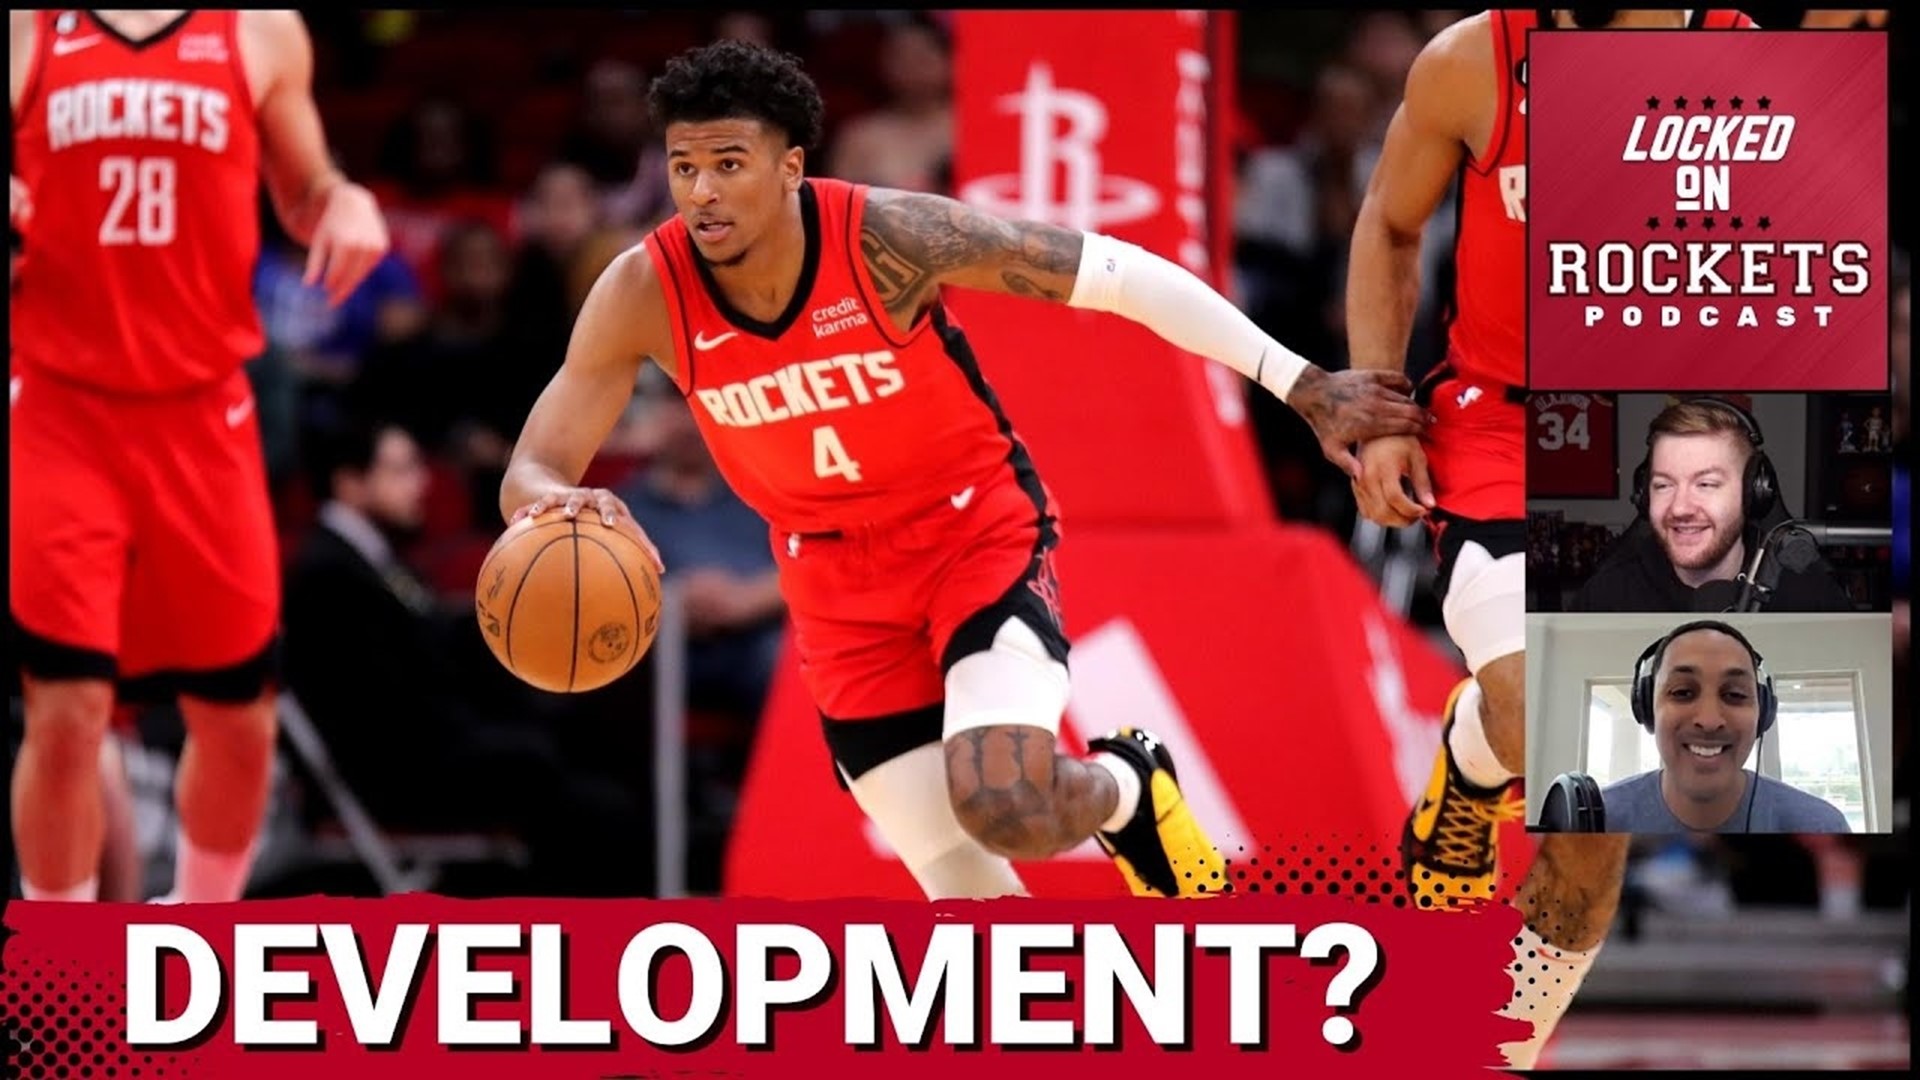 Host Jackson Gatlin is joined by Houston Rockets broadcaster Ryan Hollins to discuss areas of improvement for Jalen Green and more.